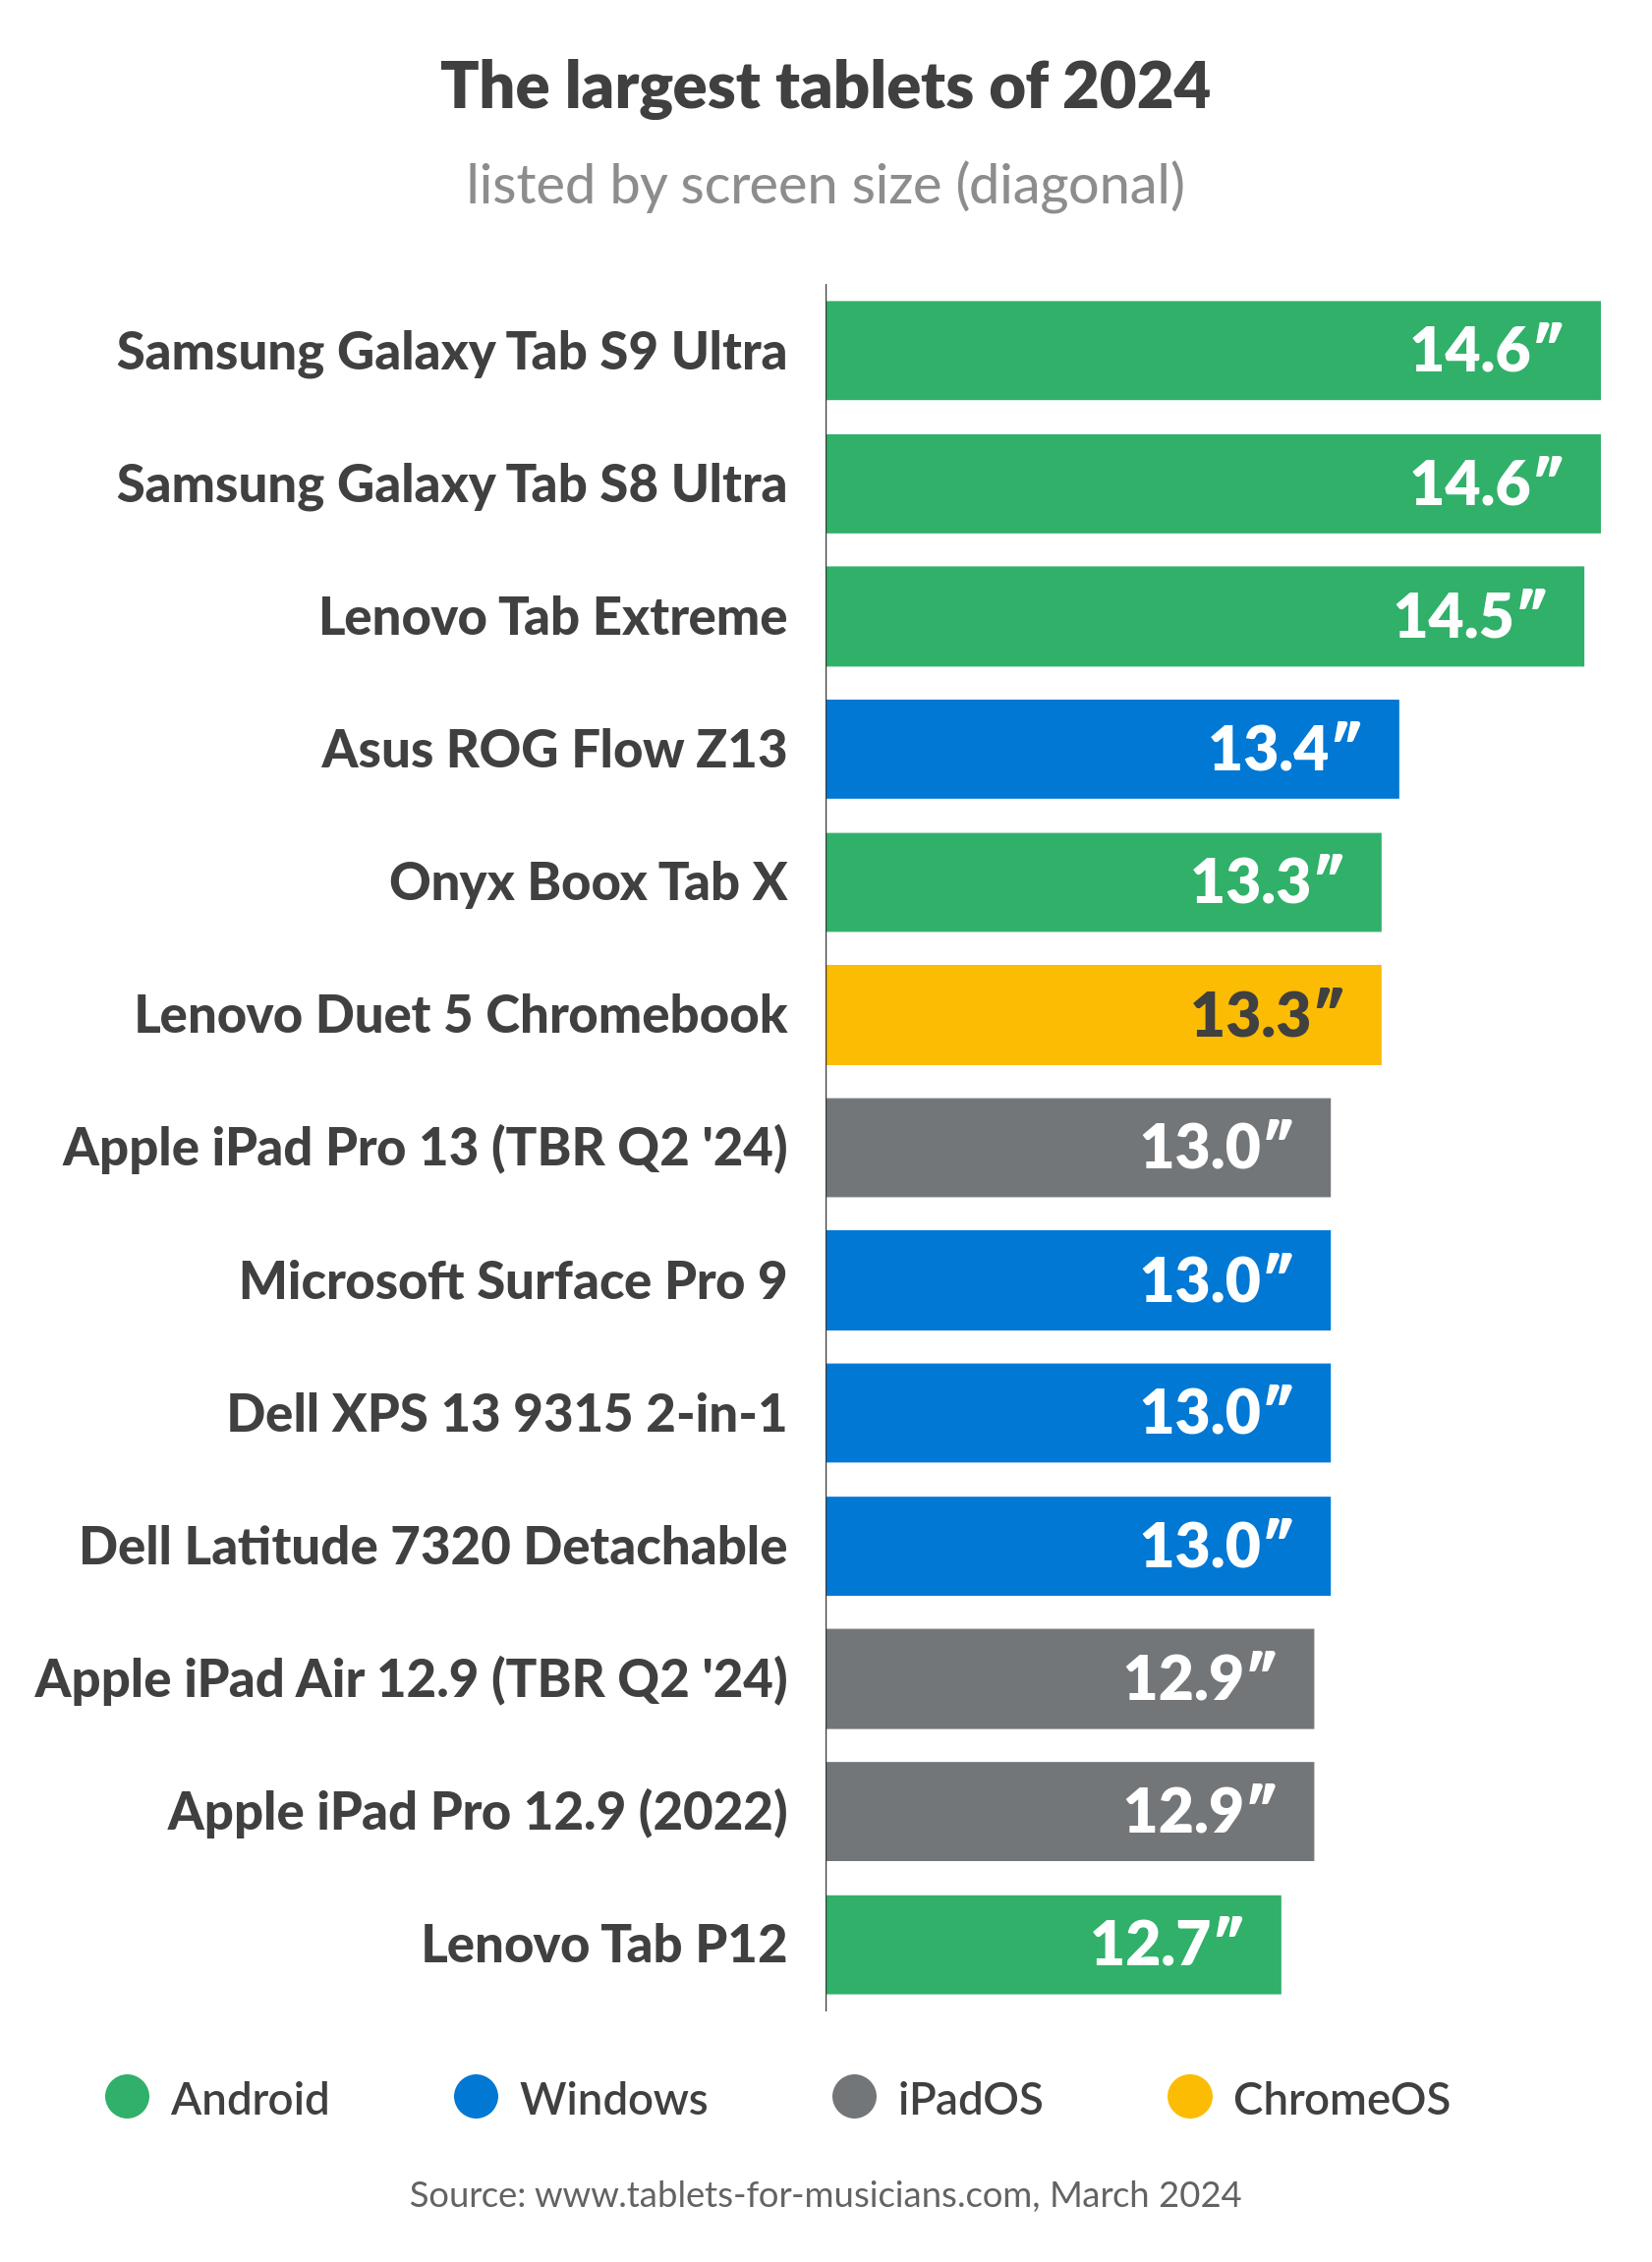 List of the biggest tablets in 2024, sorted by screen size (diagram)